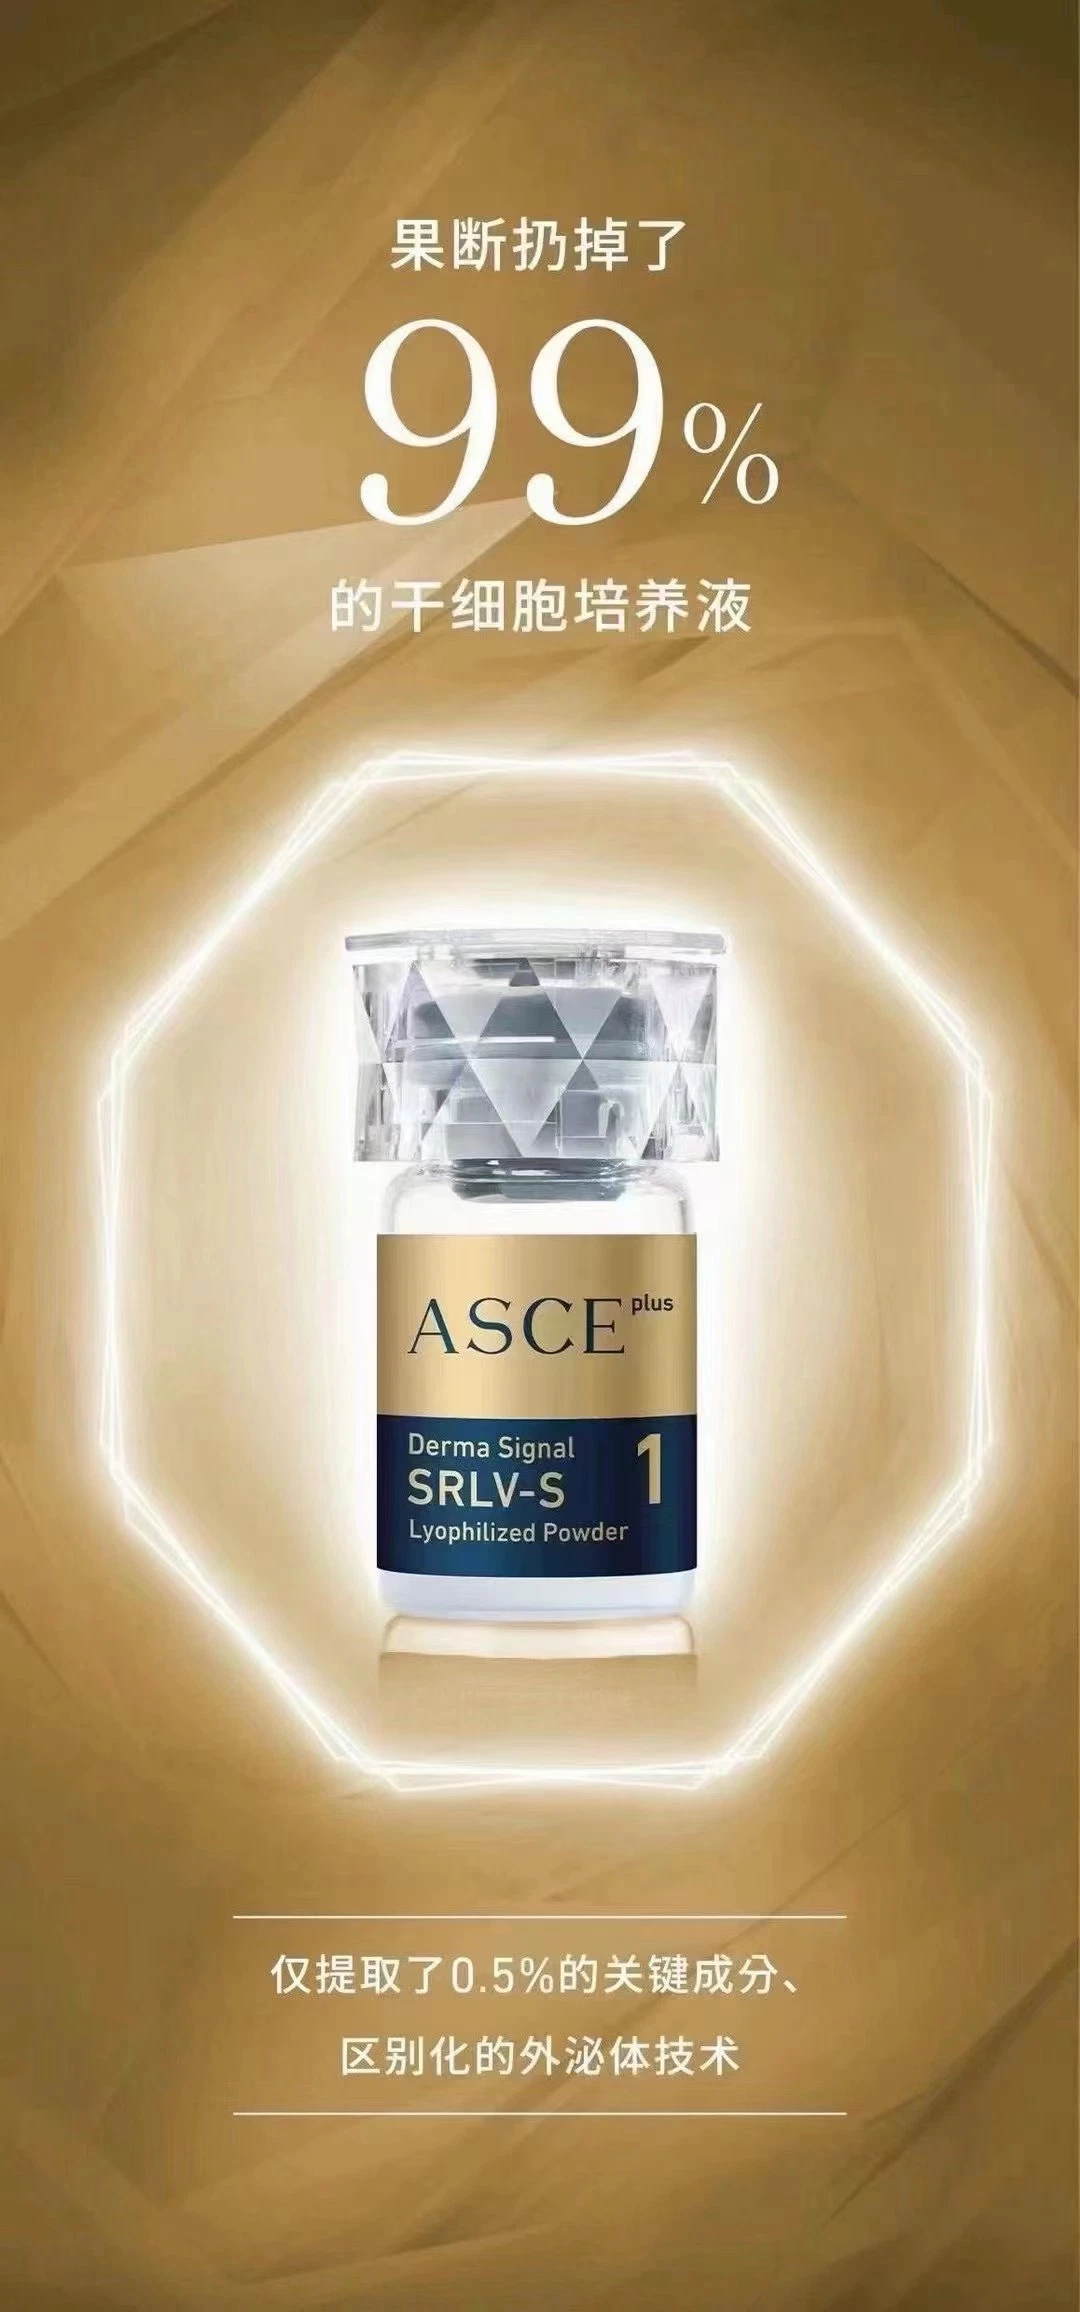 Freeze-Dried Exosome Solution Asxe Plus Asce+ Exosome Human Stem Cell Derma Signal Kit Grow-Th Factor Skin Care Anti Aging